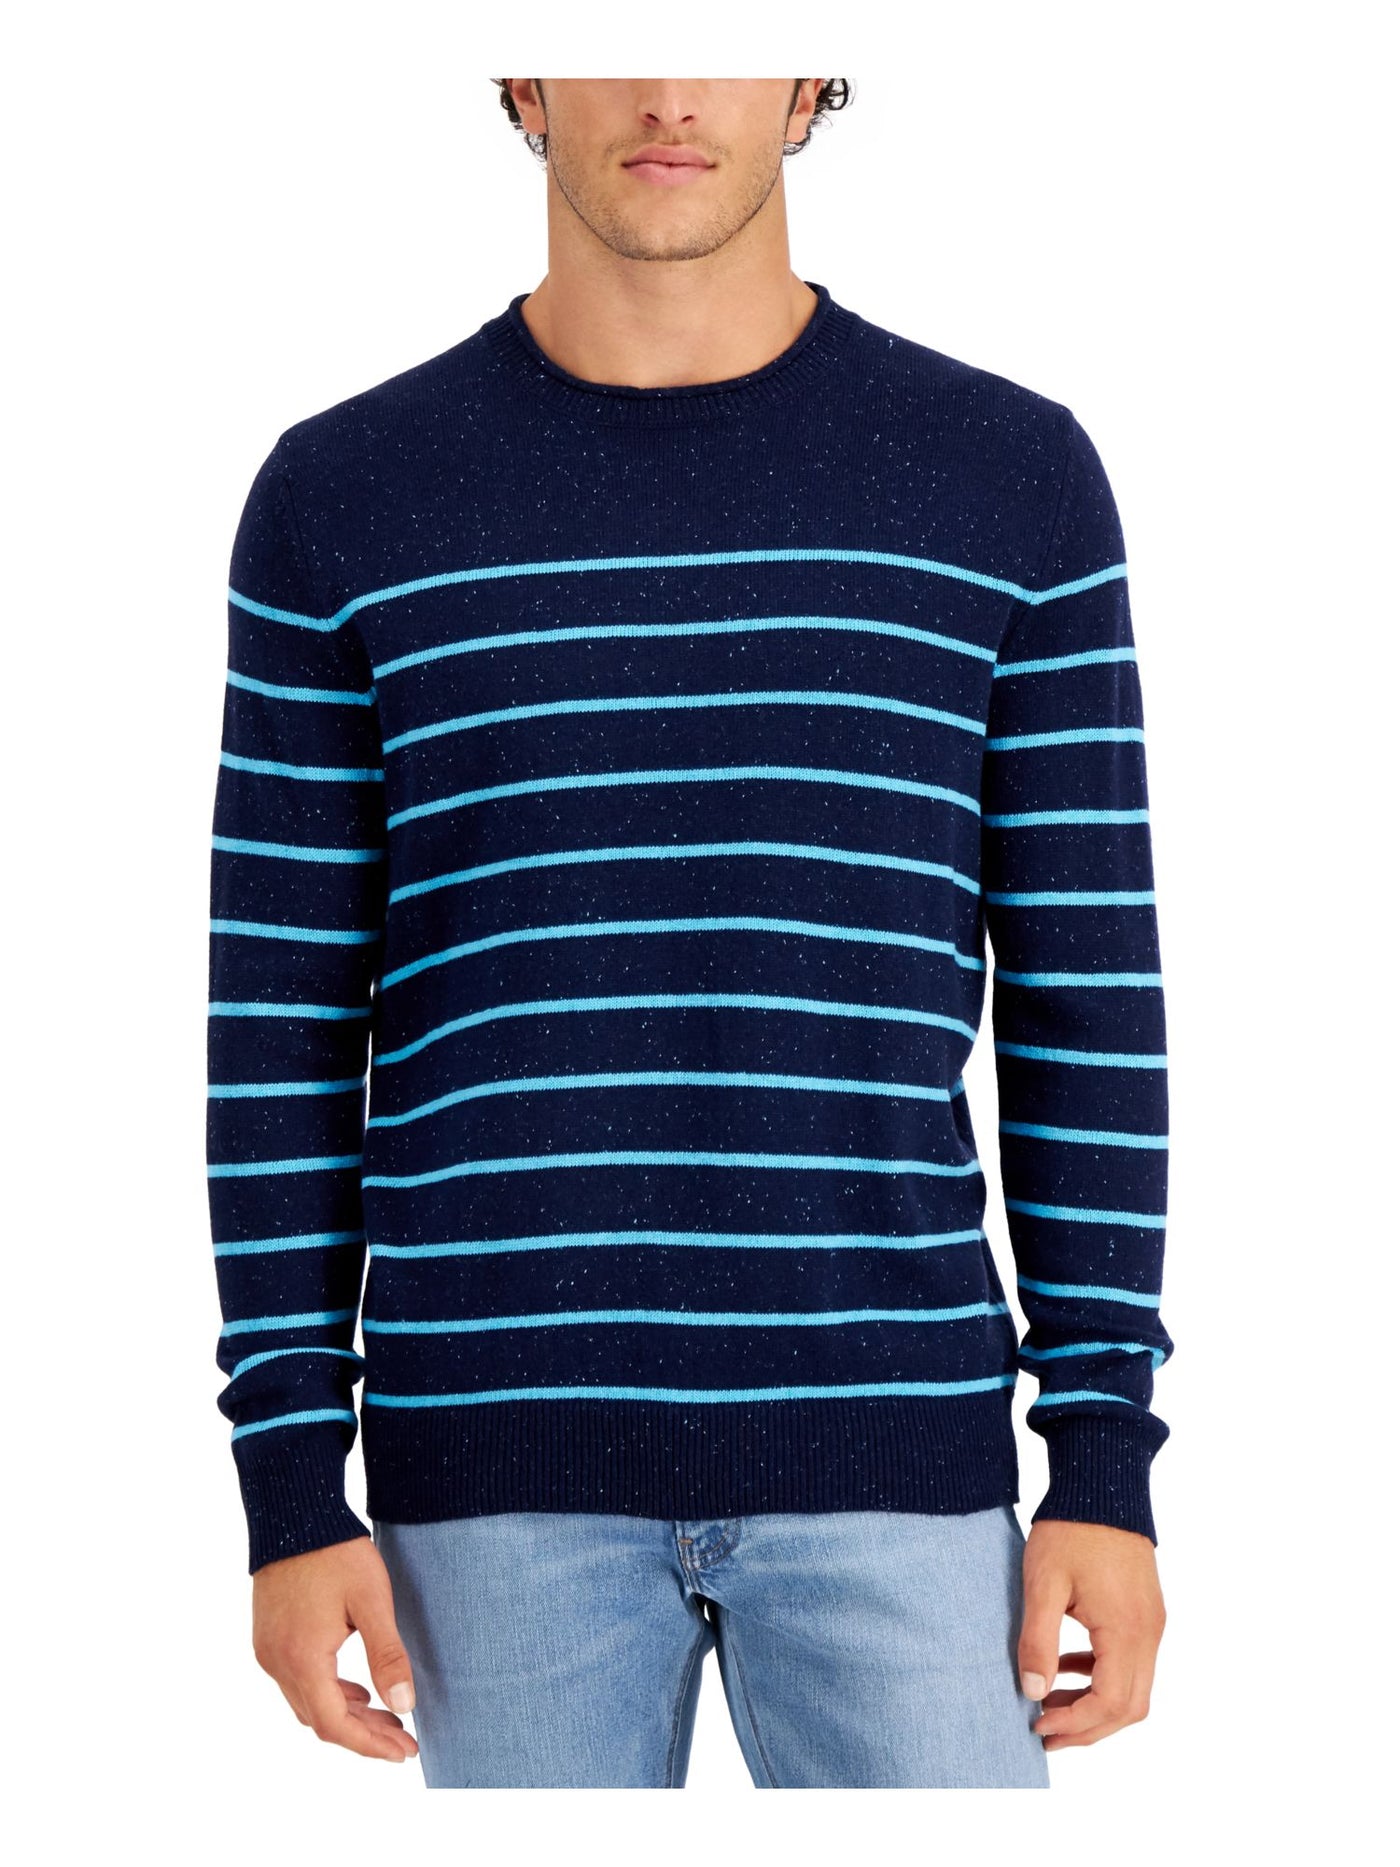 CLUBROOM Mens Gregor Navy Striped Crew Neck Classic Fit Pullover Sweater S